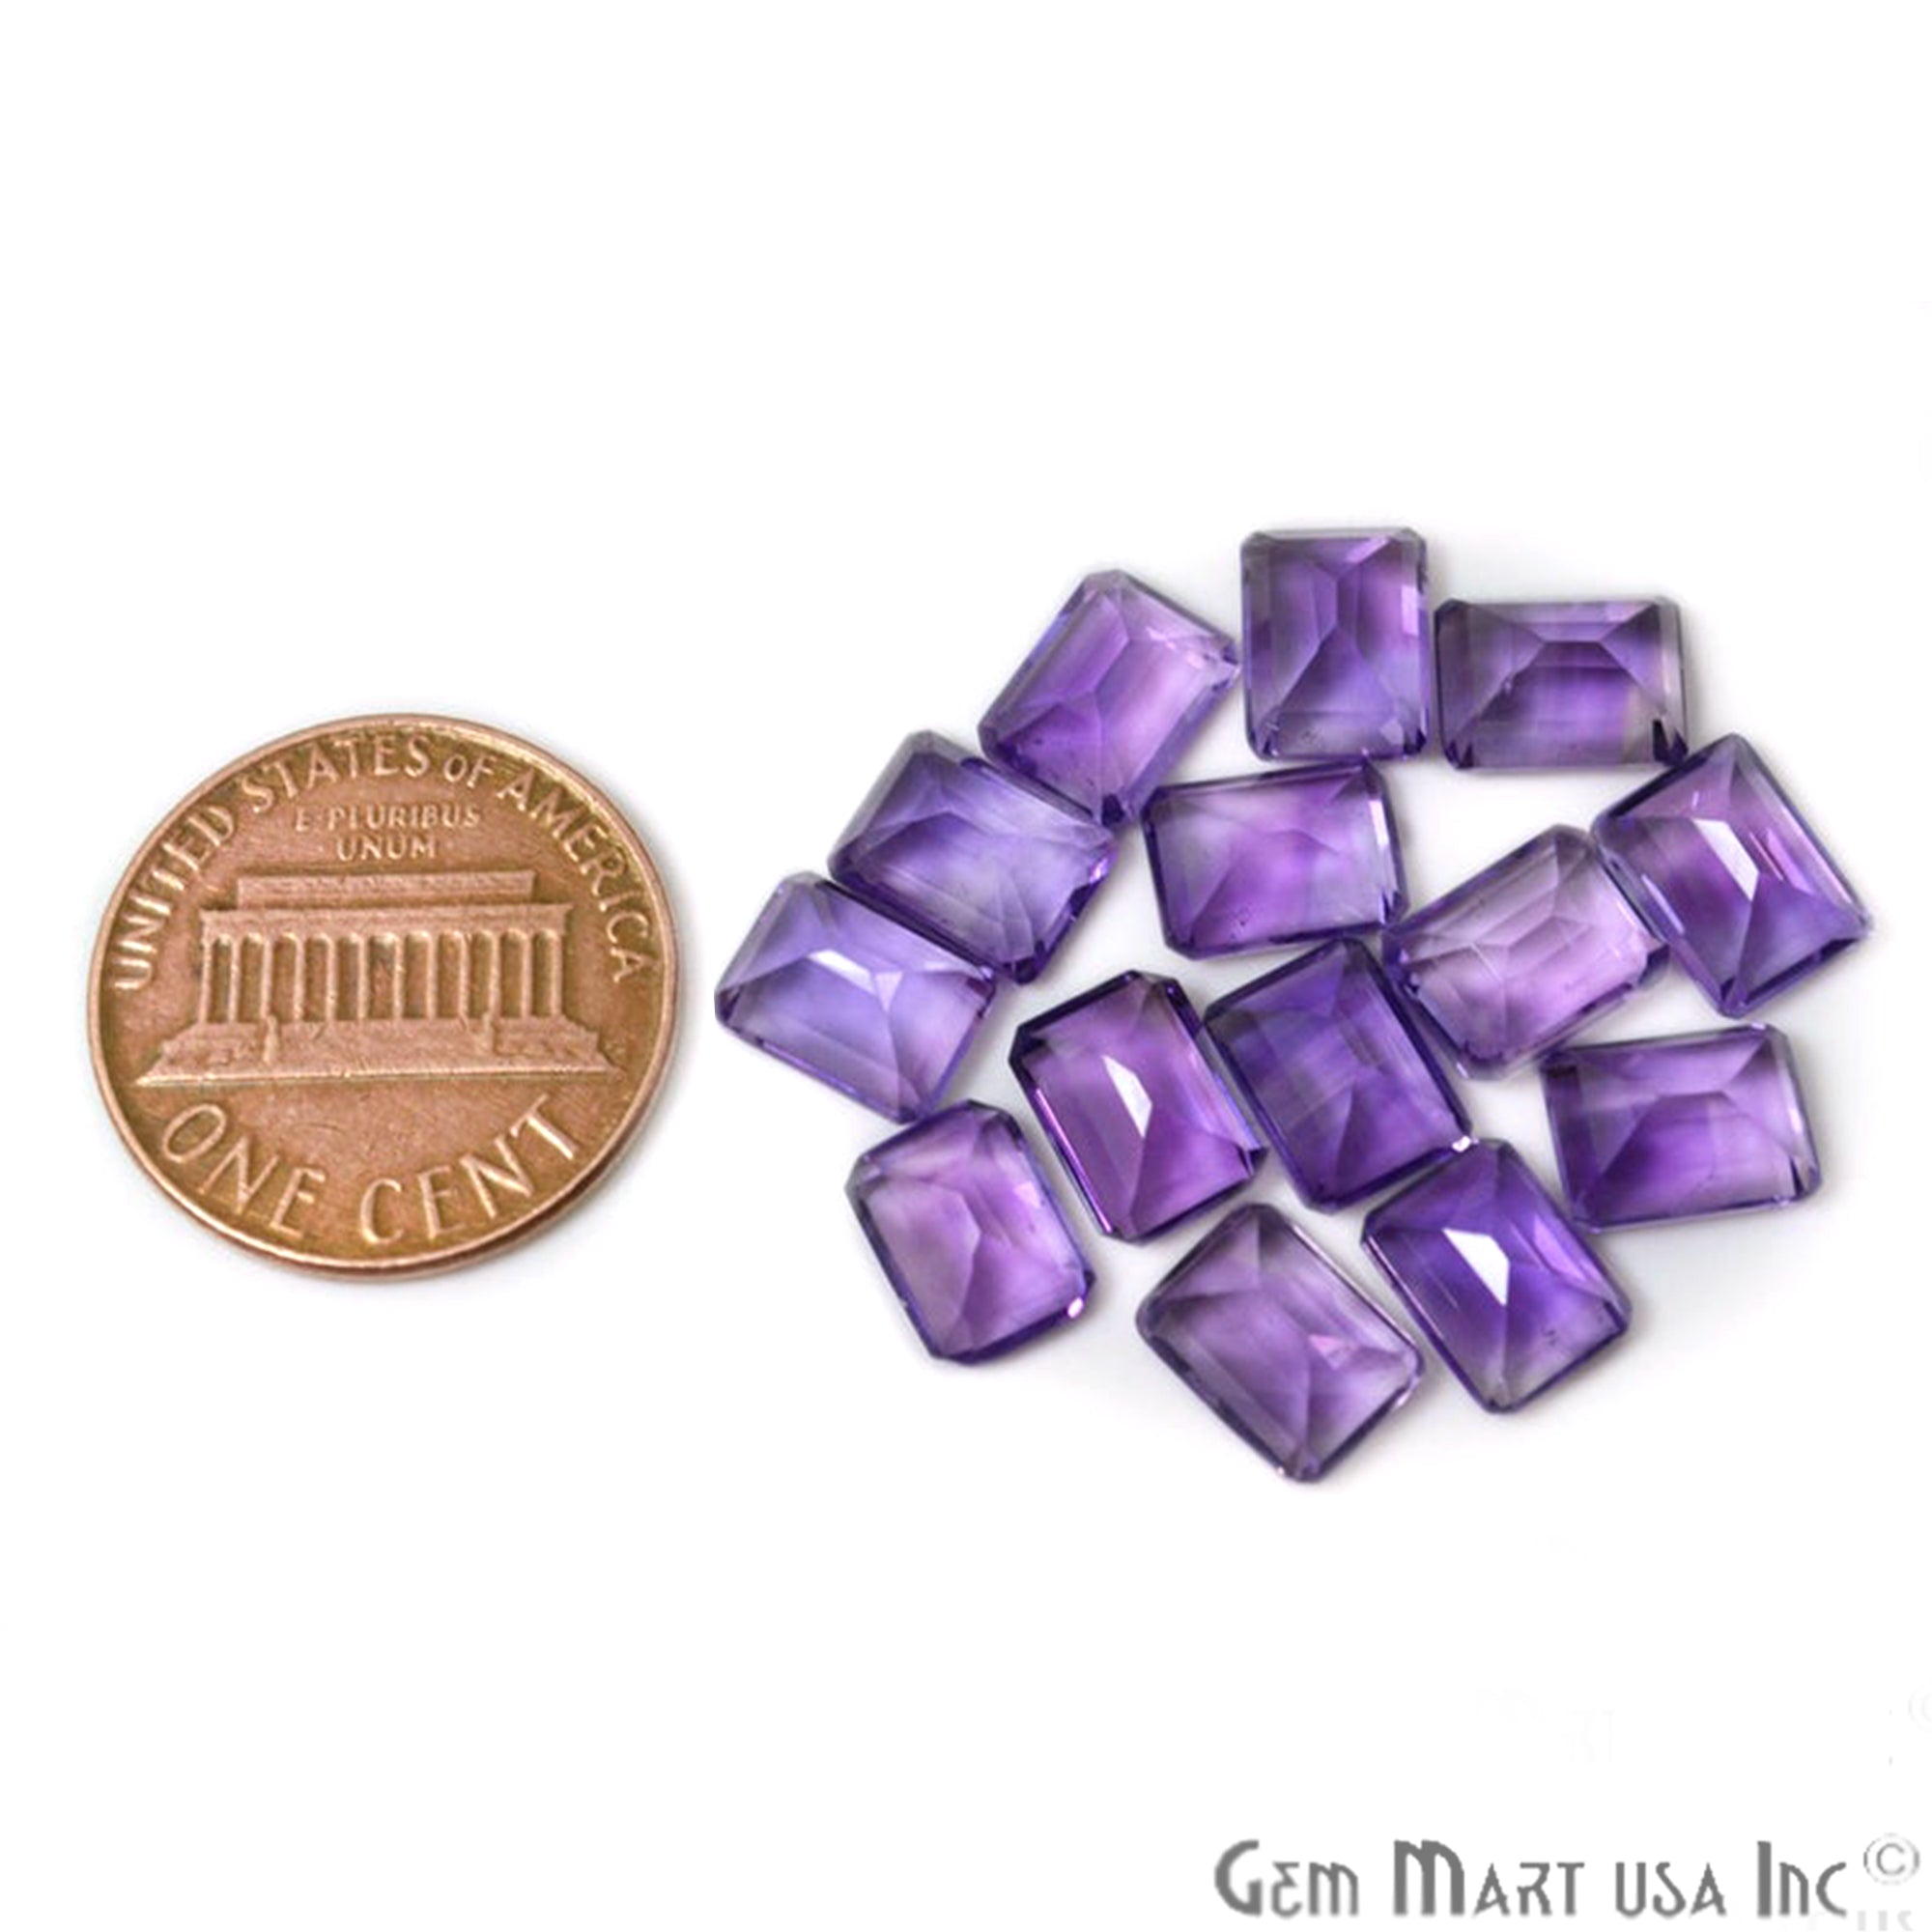 20 cts Amethyst Octagon 6x8, Loose Faceted Stone, Amethyst Mix, Amazing Cut and Quality - GemMartUSA